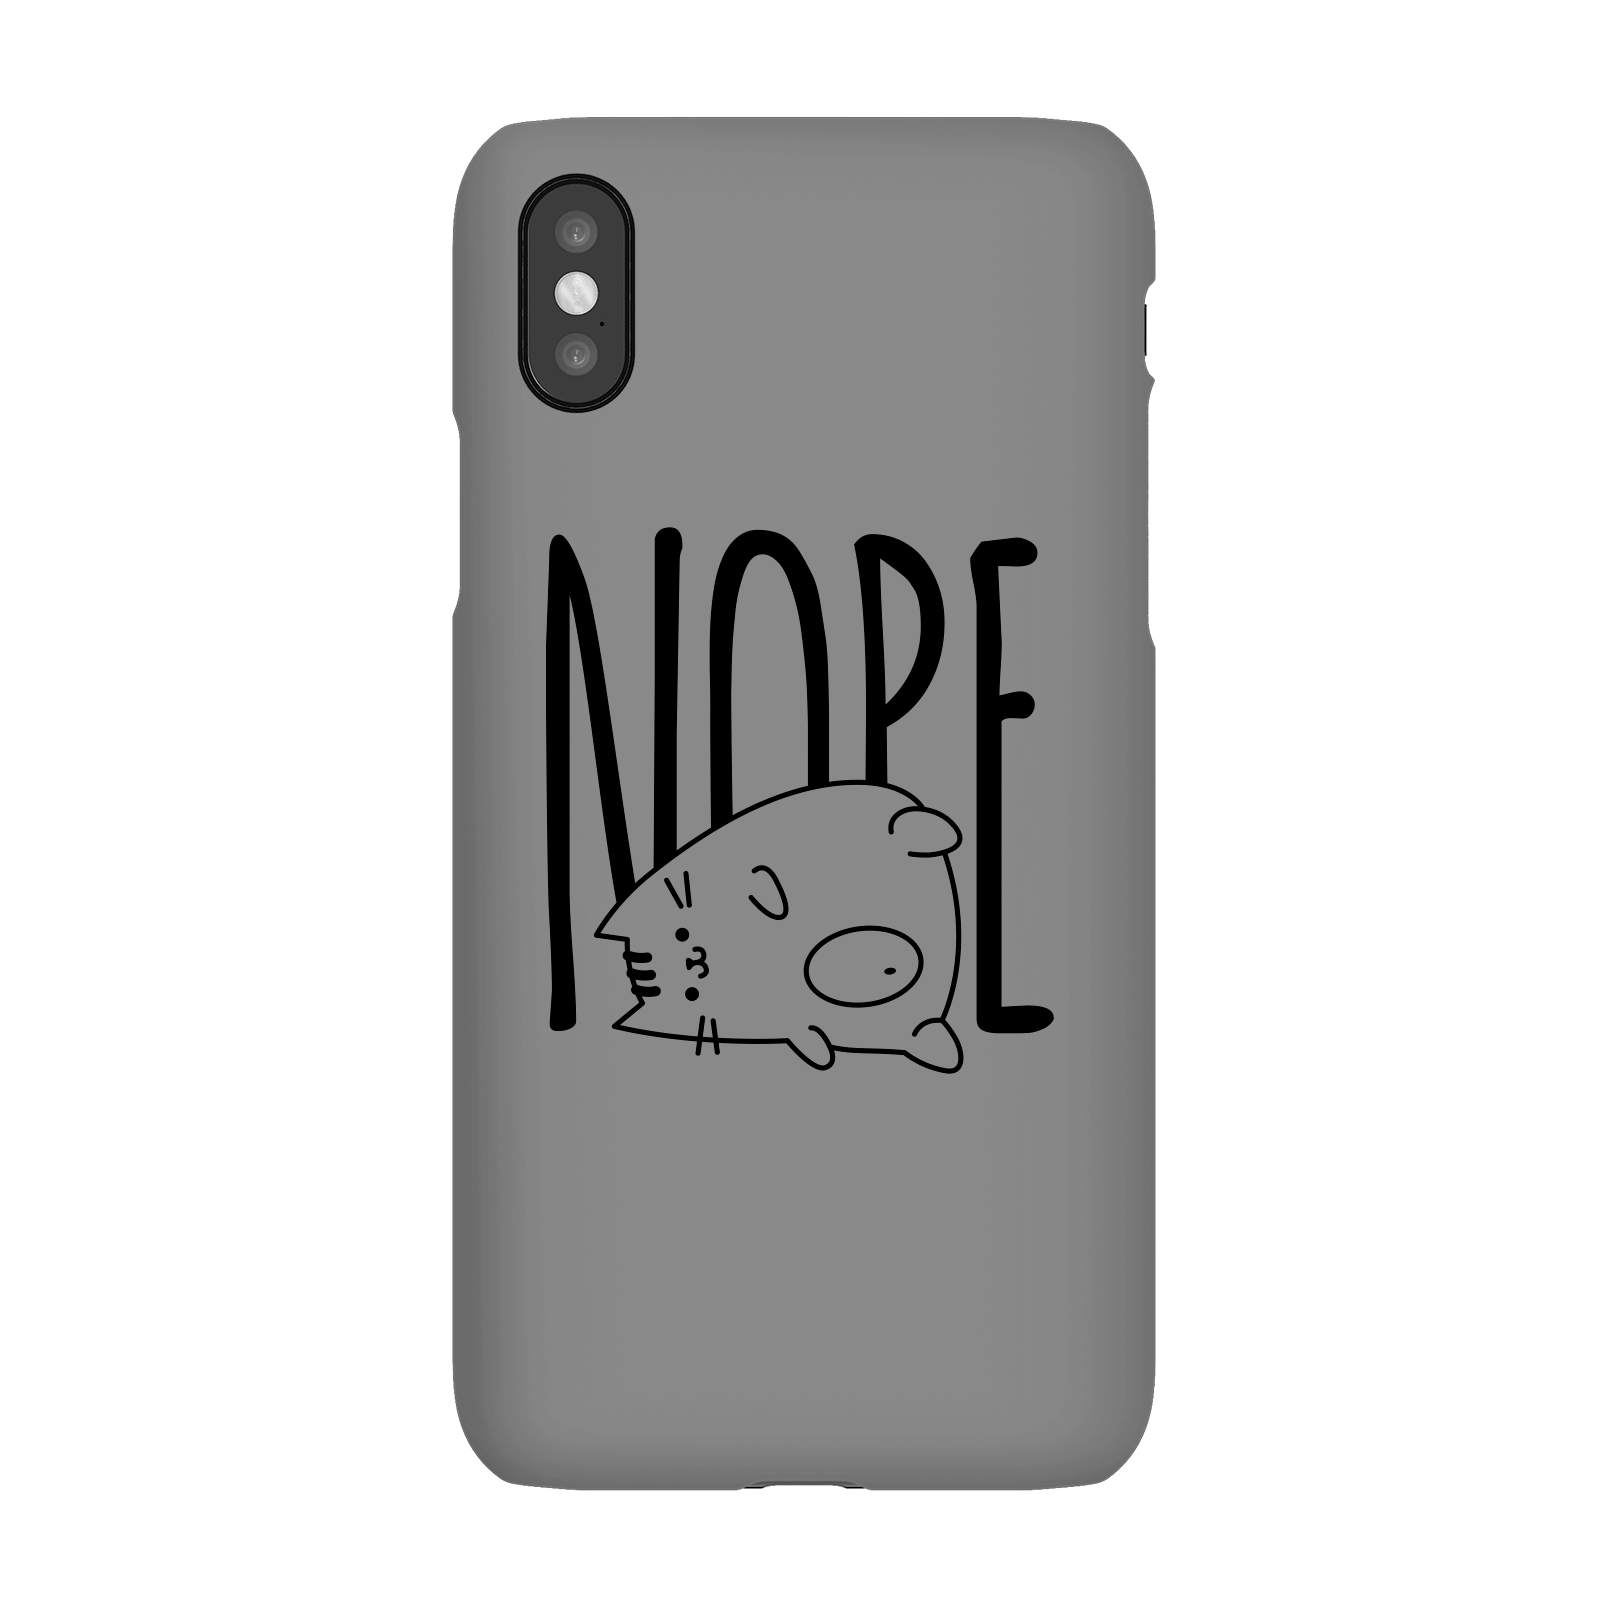 Nope Phone Case for iPhone and Android - iPhone X - Snap Case - Gloss